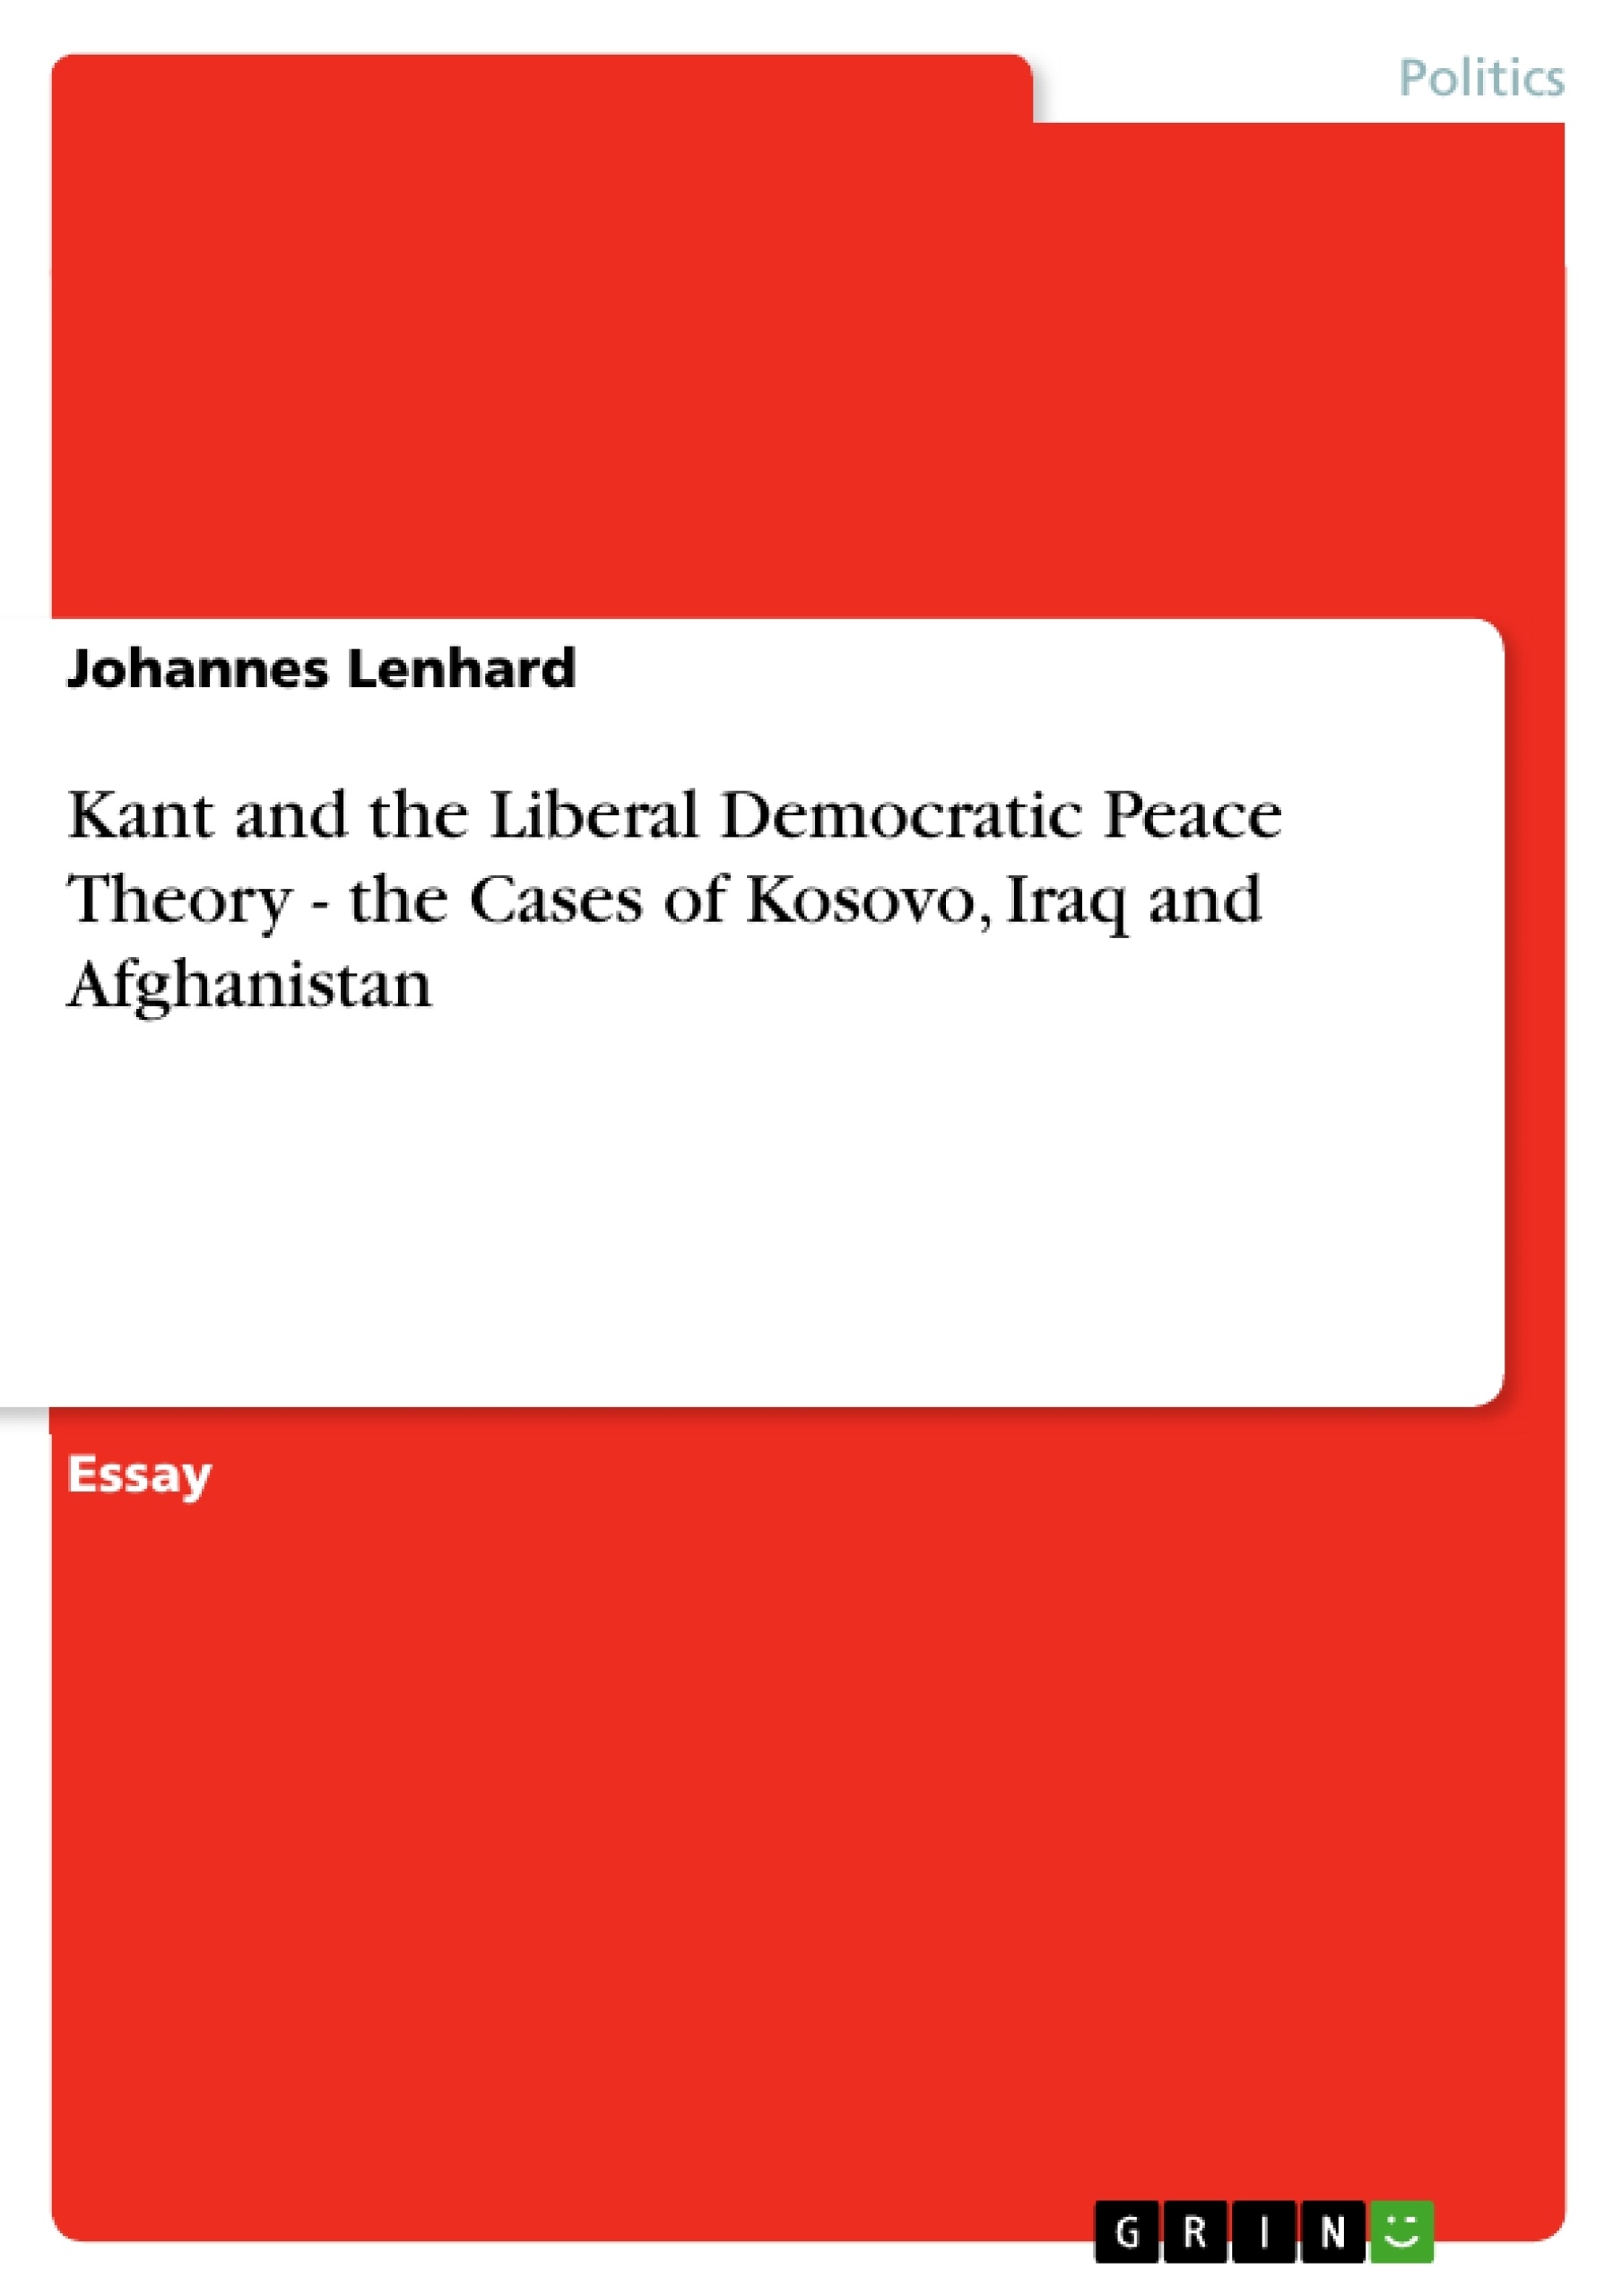 Title: Kant and the Liberal Democratic Peace Theory - the Cases of Kosovo, Iraq and Afghanistan